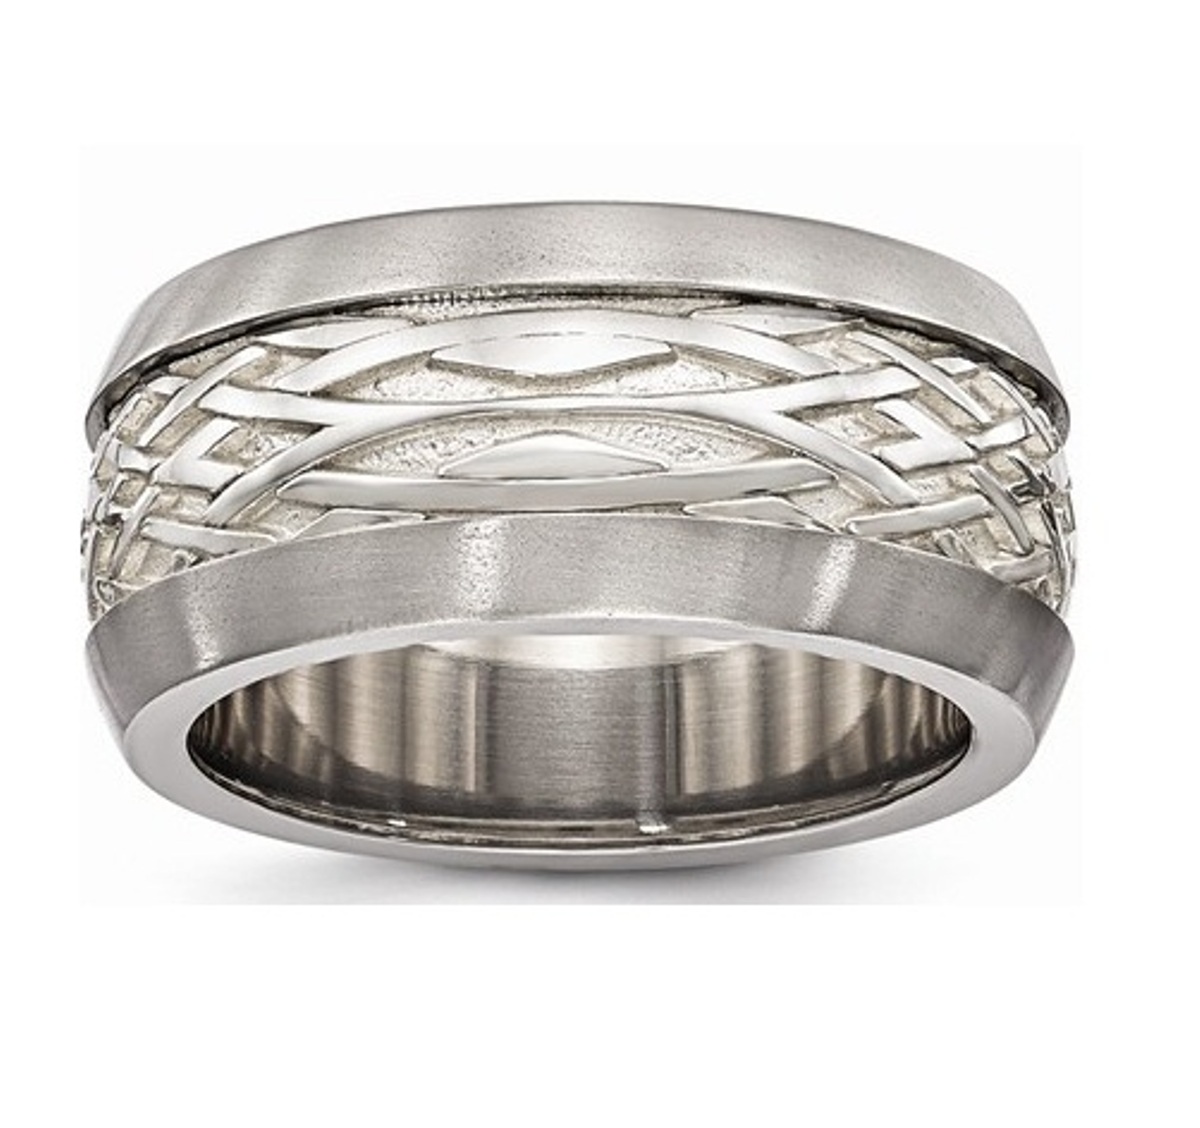  Titanium And Sterling Silver Inlay Polished Weave Ring